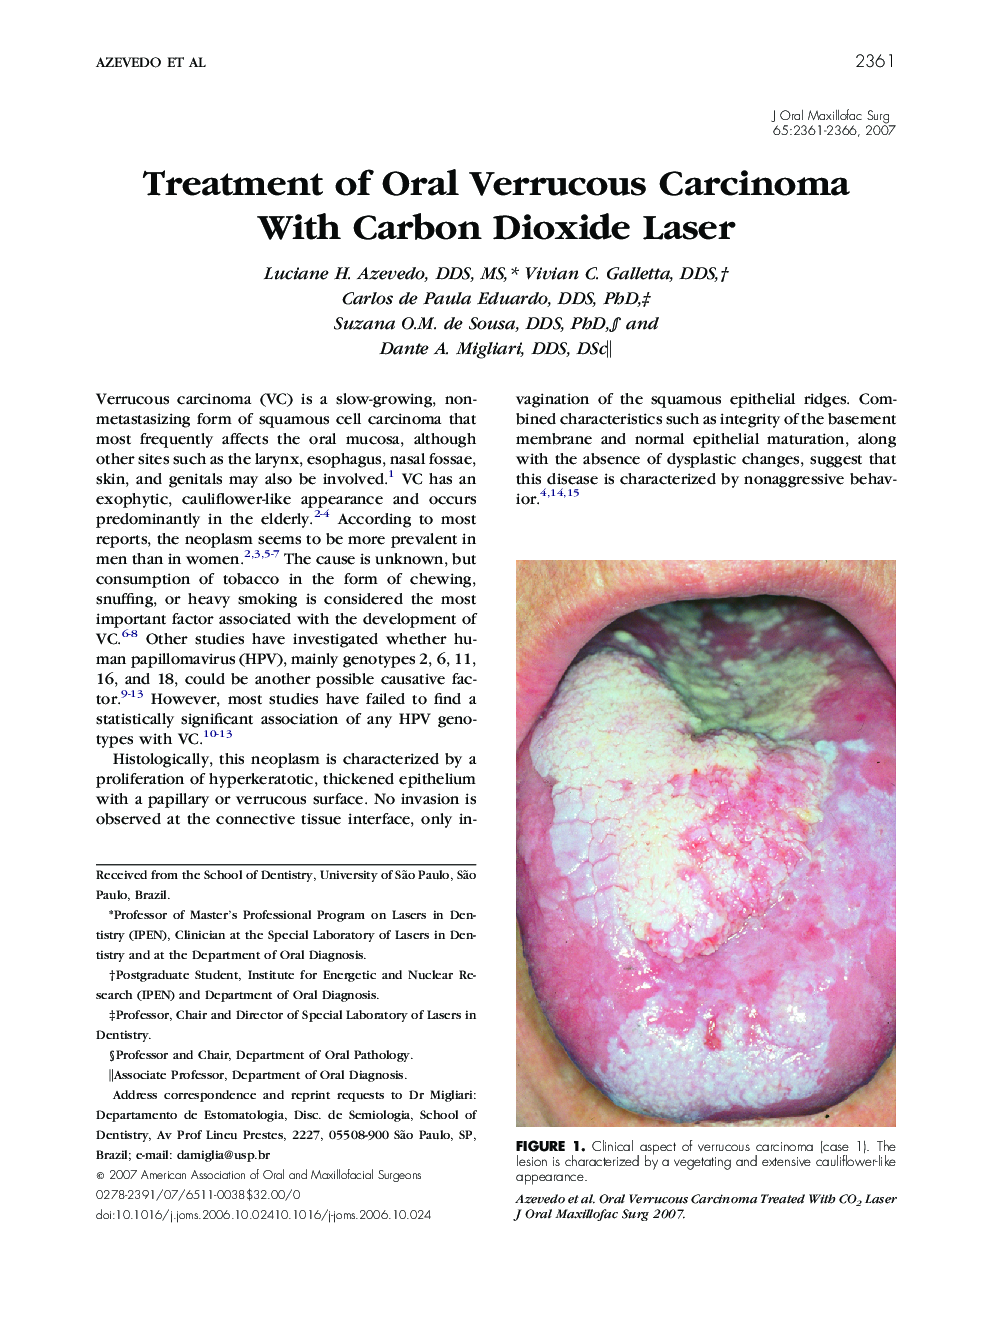 Treatment of Oral Verrucous Carcinoma With Carbon Dioxide Laser